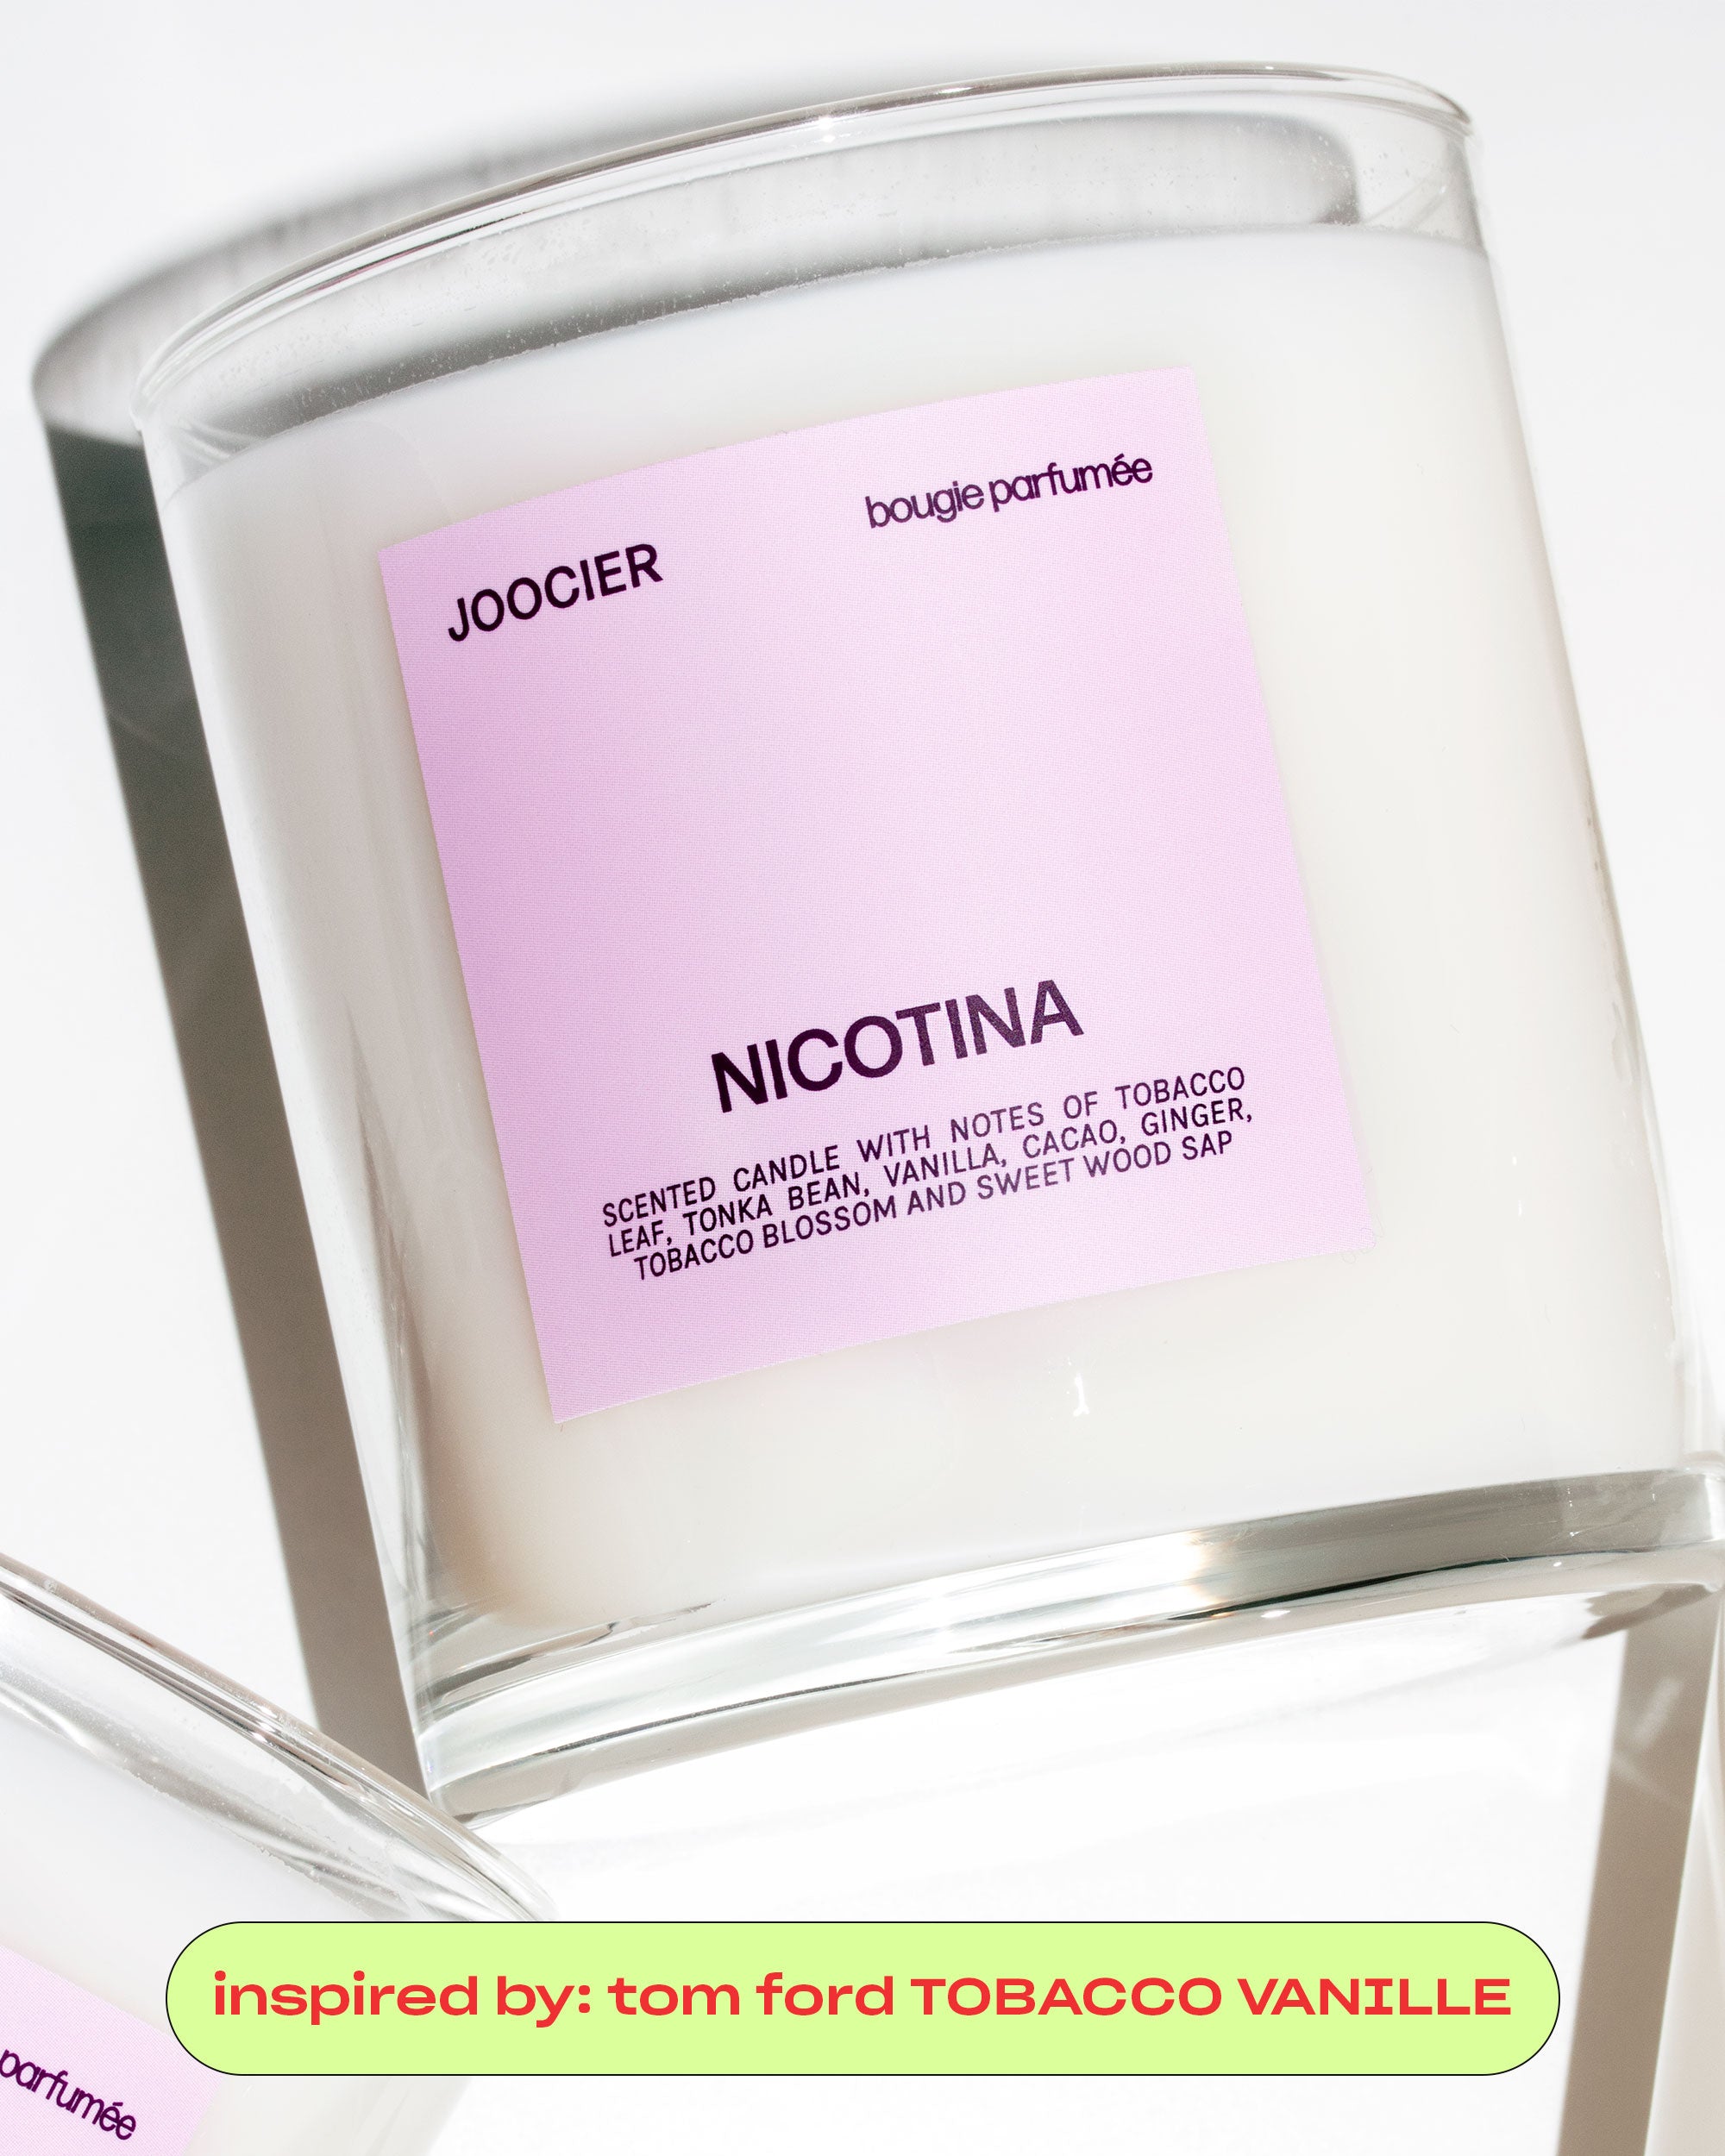 NICOTINA Inspired by Tom Ford Tobacco Vanille – joocier